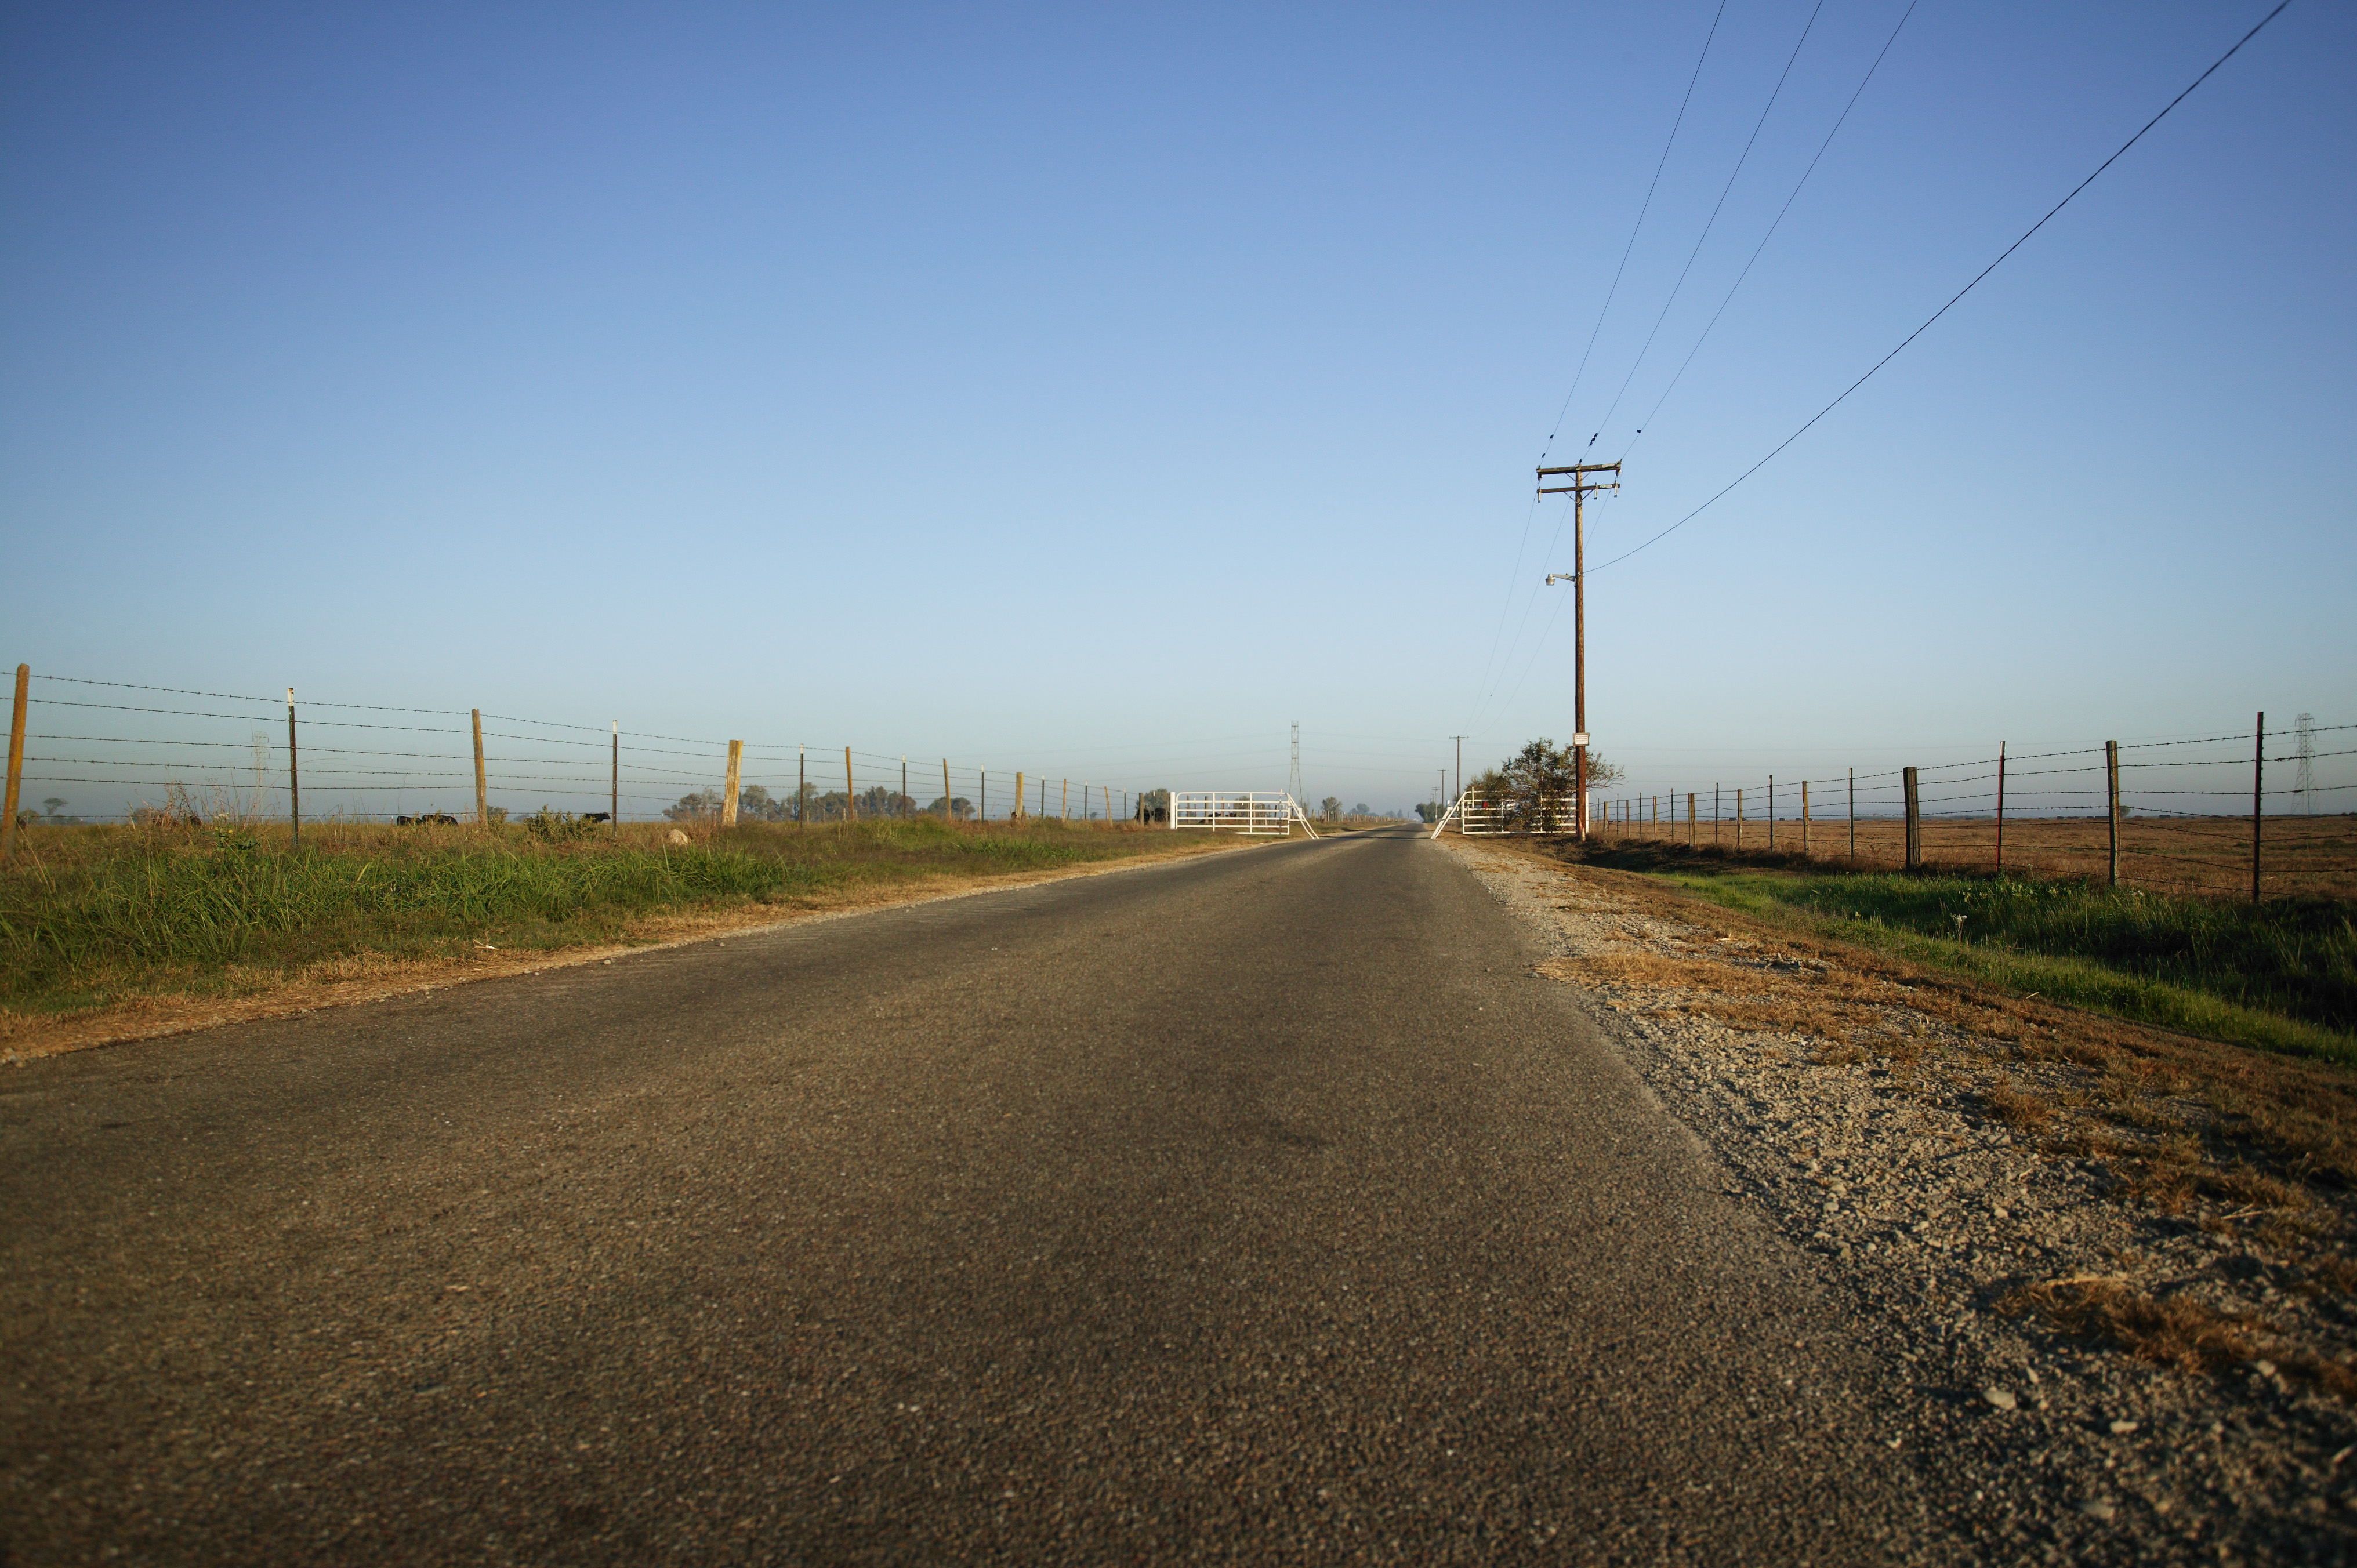 photo,material,free,landscape,picture,stock photo,Creative Commons,Farm road, ranch, Asphalt, telephone pole, fence